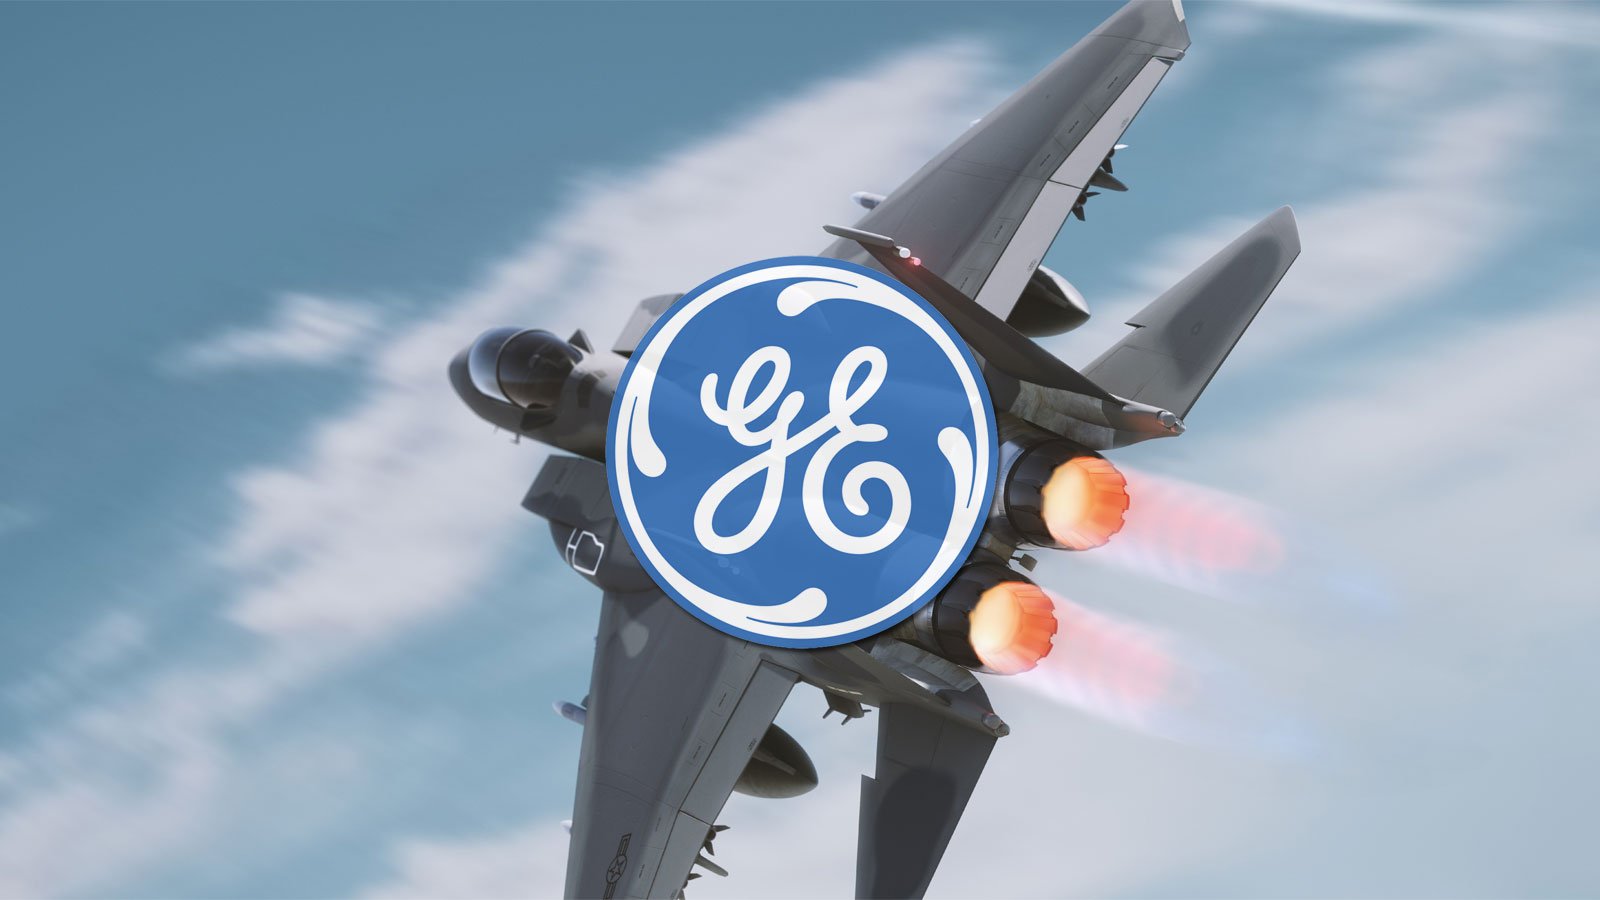 General Electric investigates claims of cyberattack, data theft